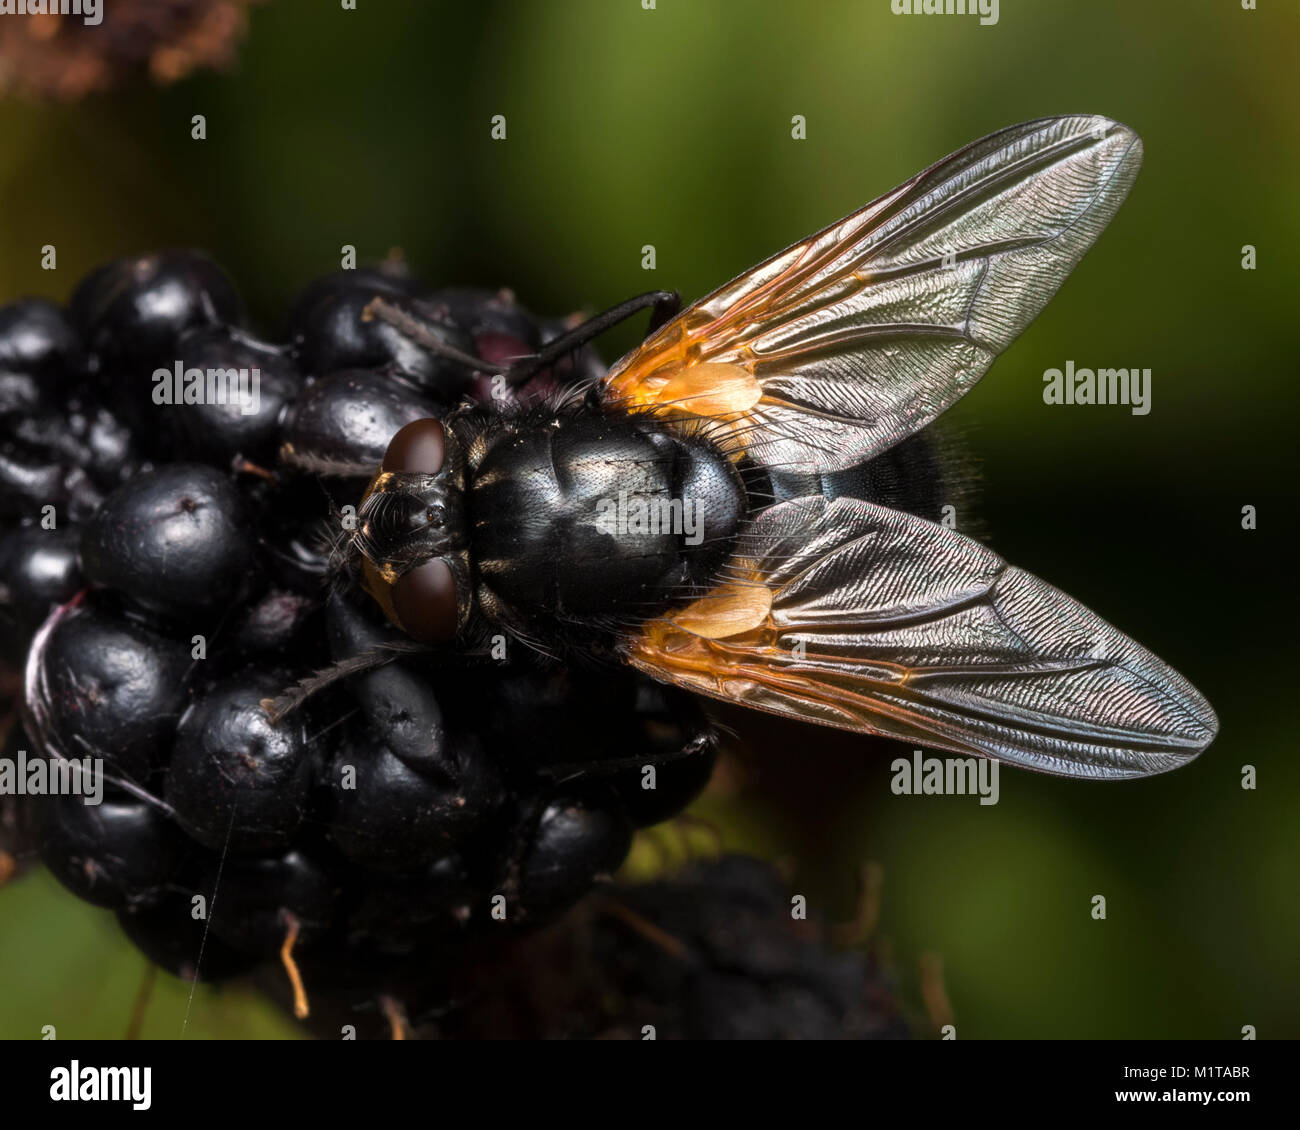 Noon Fly (Mesembrina meridiana) dorsal view of specimen perched on a blackberry. Cahir, Tipperary, Ireland. Stock Photo